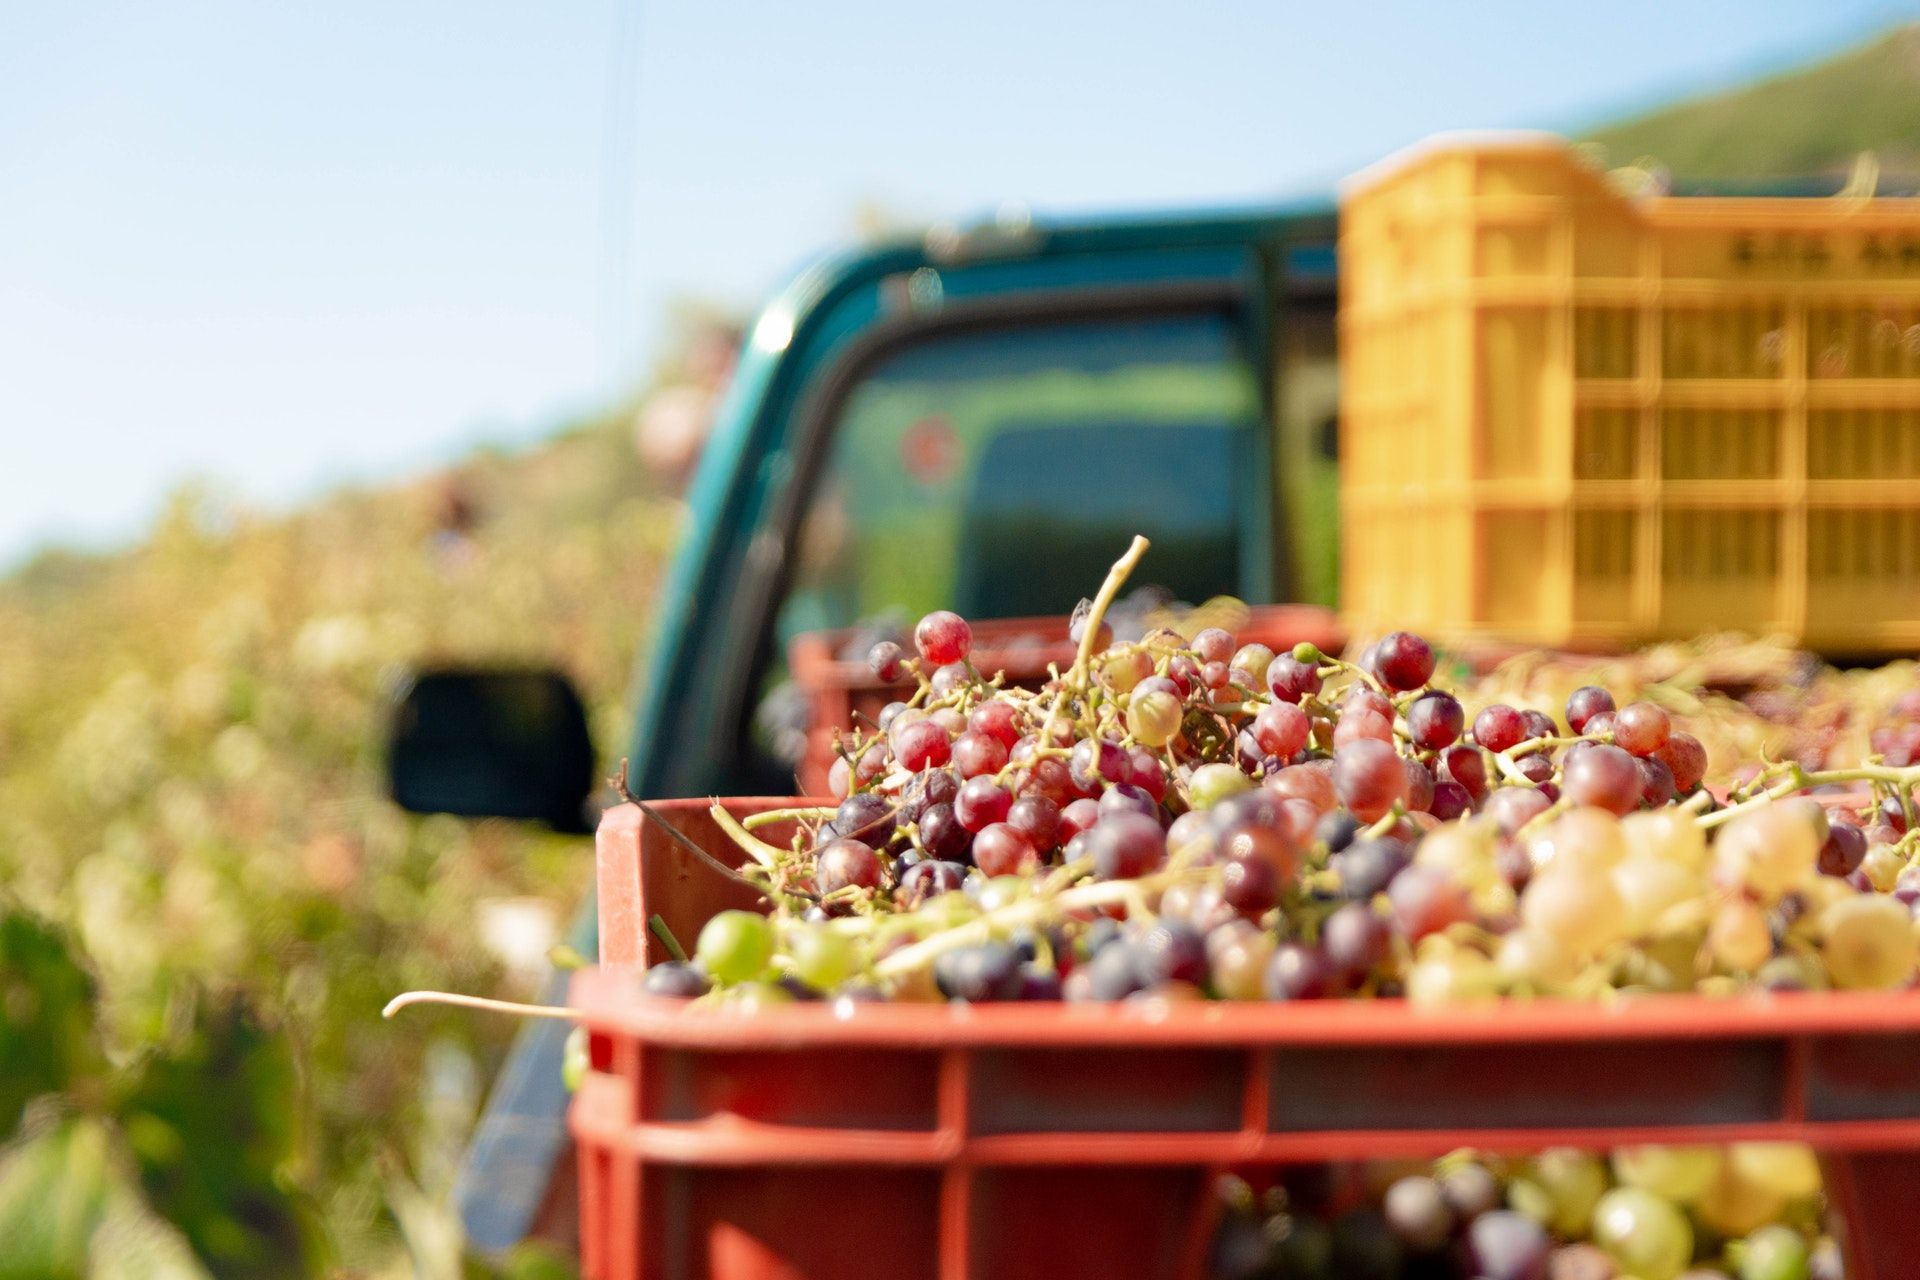 Truck with red grapes; WSET Level 1 wine exam